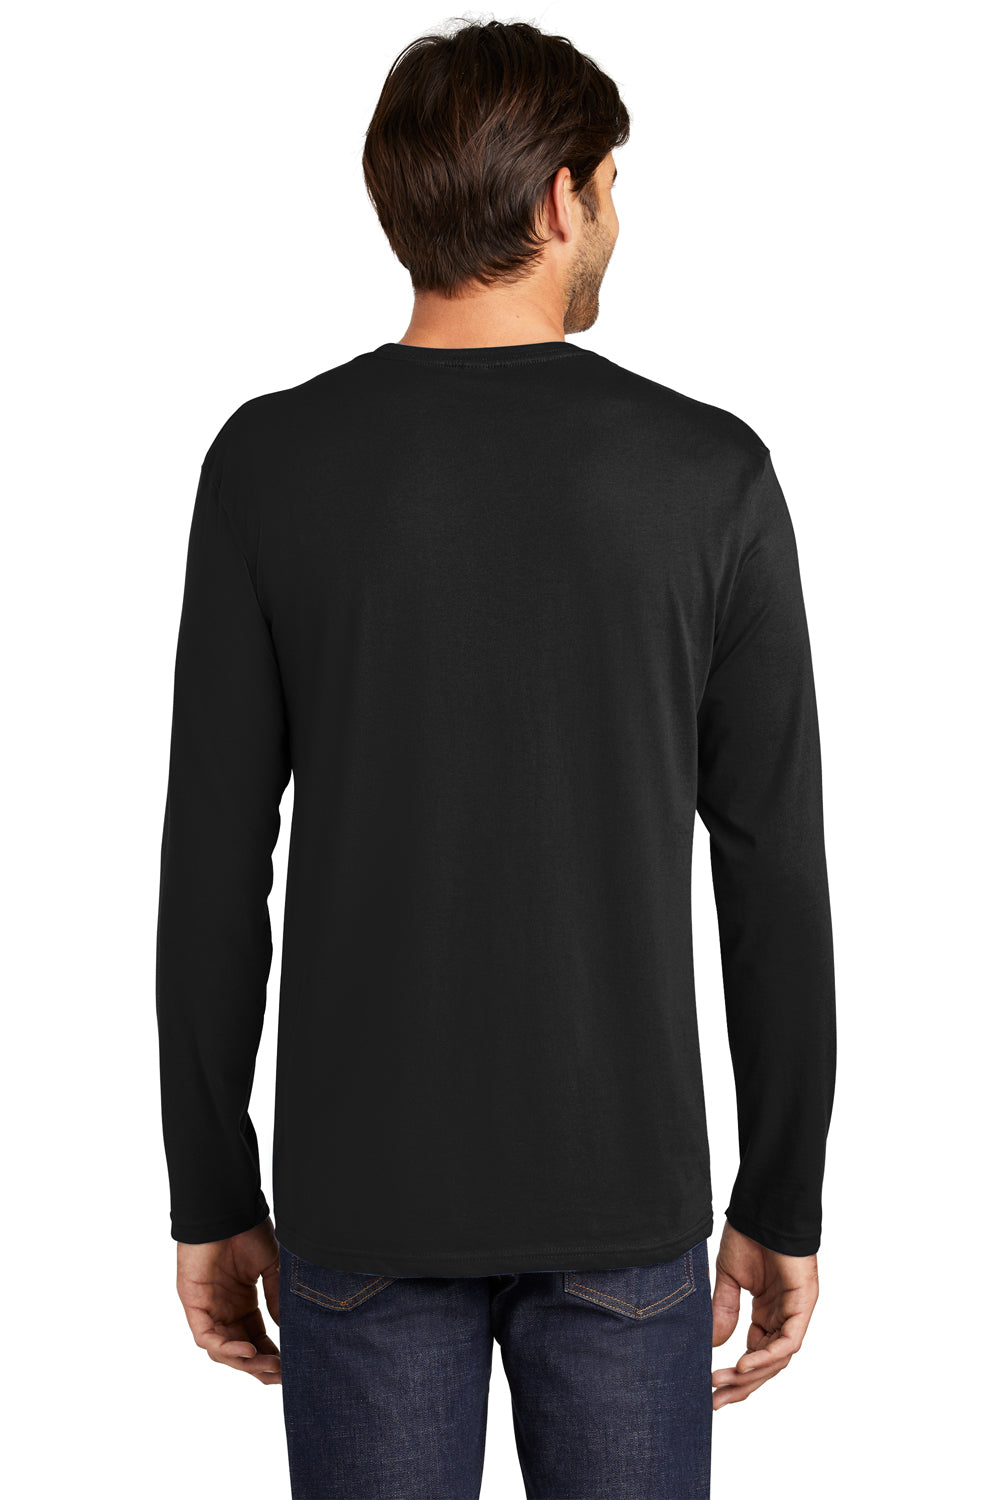 District DT105 Mens Perfect Weight Long Sleeve Crewneck T-Shirt Black Back